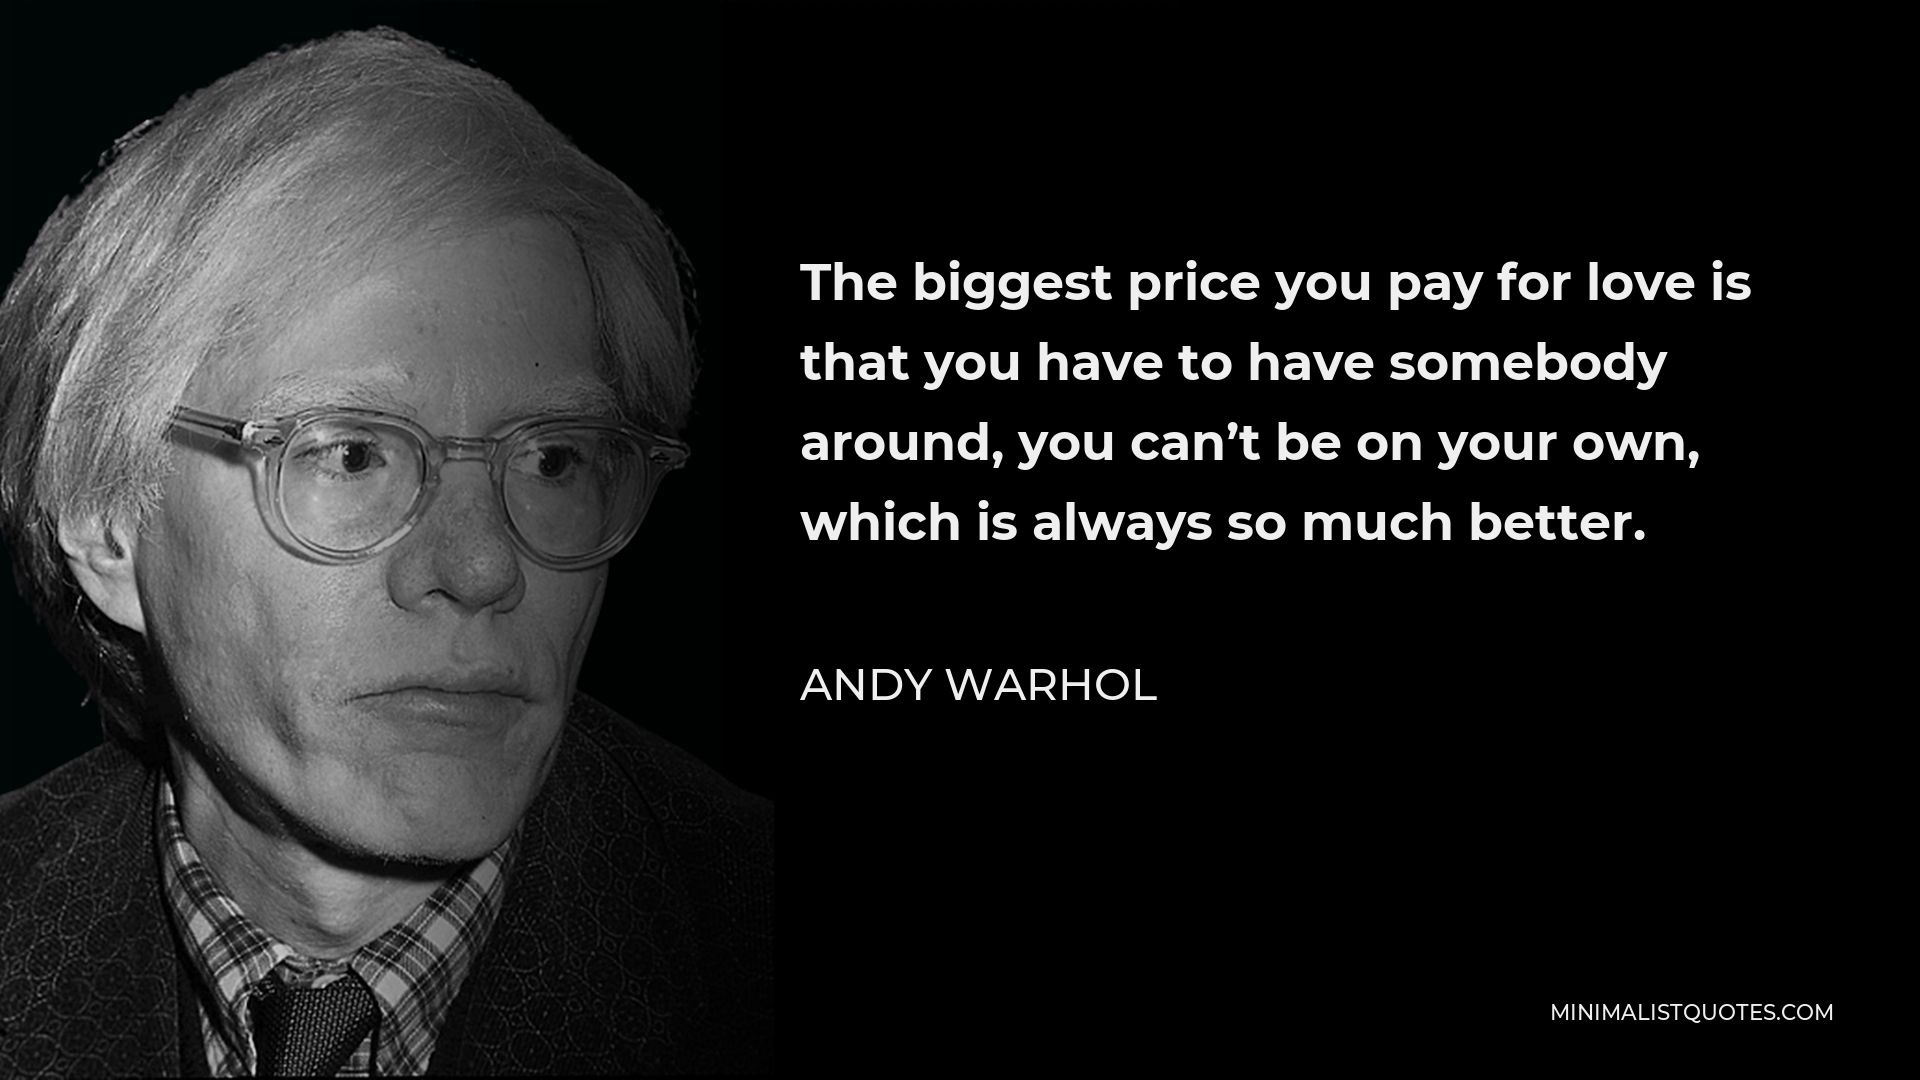 Andy Warhol Quote - The biggest price you pay for love is that you have to have somebody around, you can’t be on your own, which is always so much better.